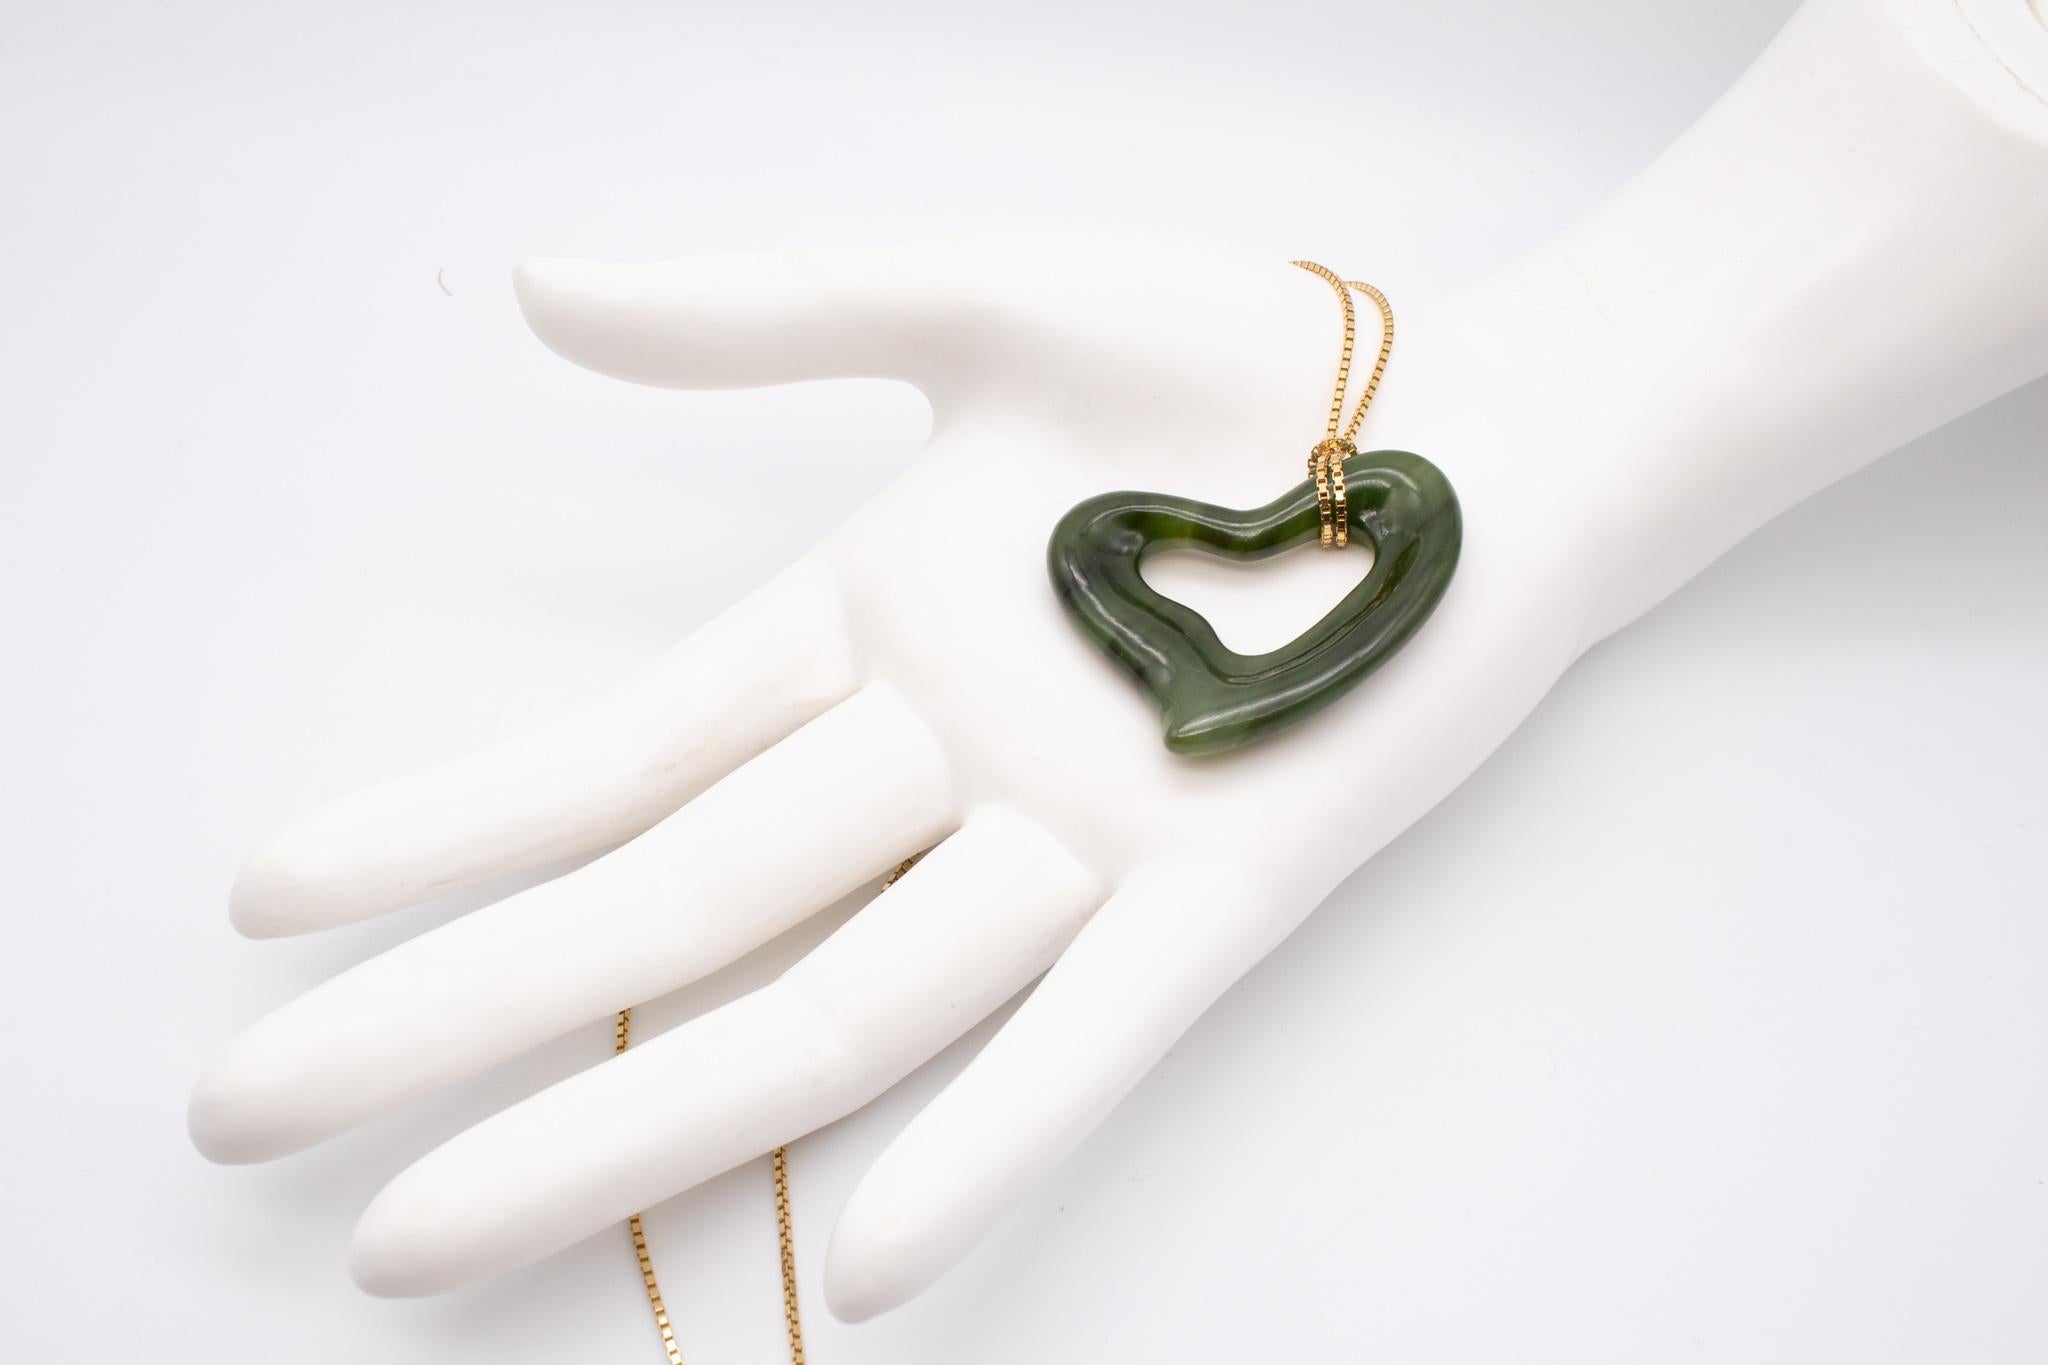 Rare nephrite heart necklace by Elsa Peretti (1940-2021) for Tiffany & Co. 

An unusual vintage piece designed by Elsa Peretti, back in the 1970's. It was created at the Tiffany Studios in New York and designed as a pendant necklace in the form of a